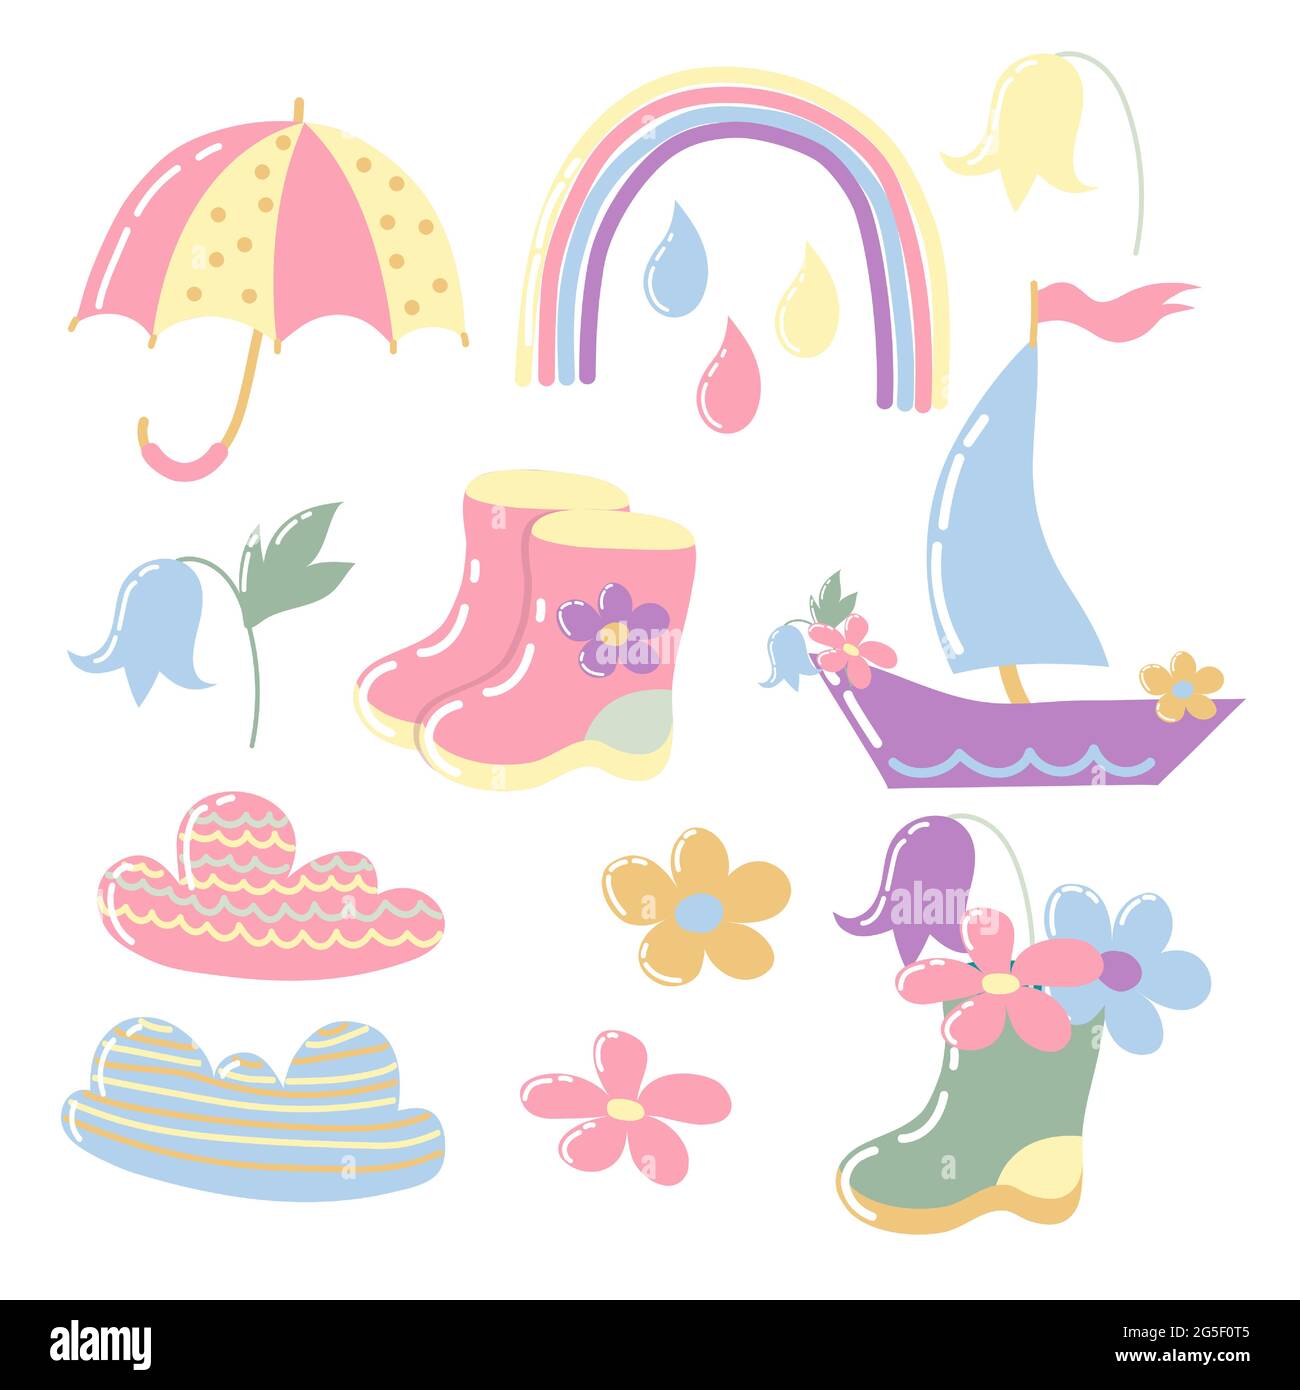 Set of vector illustrations for the design of baby products. Design elements in a flat style. Bright cartoon drawings. Boots, flowers, rainbow, clouds Stock Vector